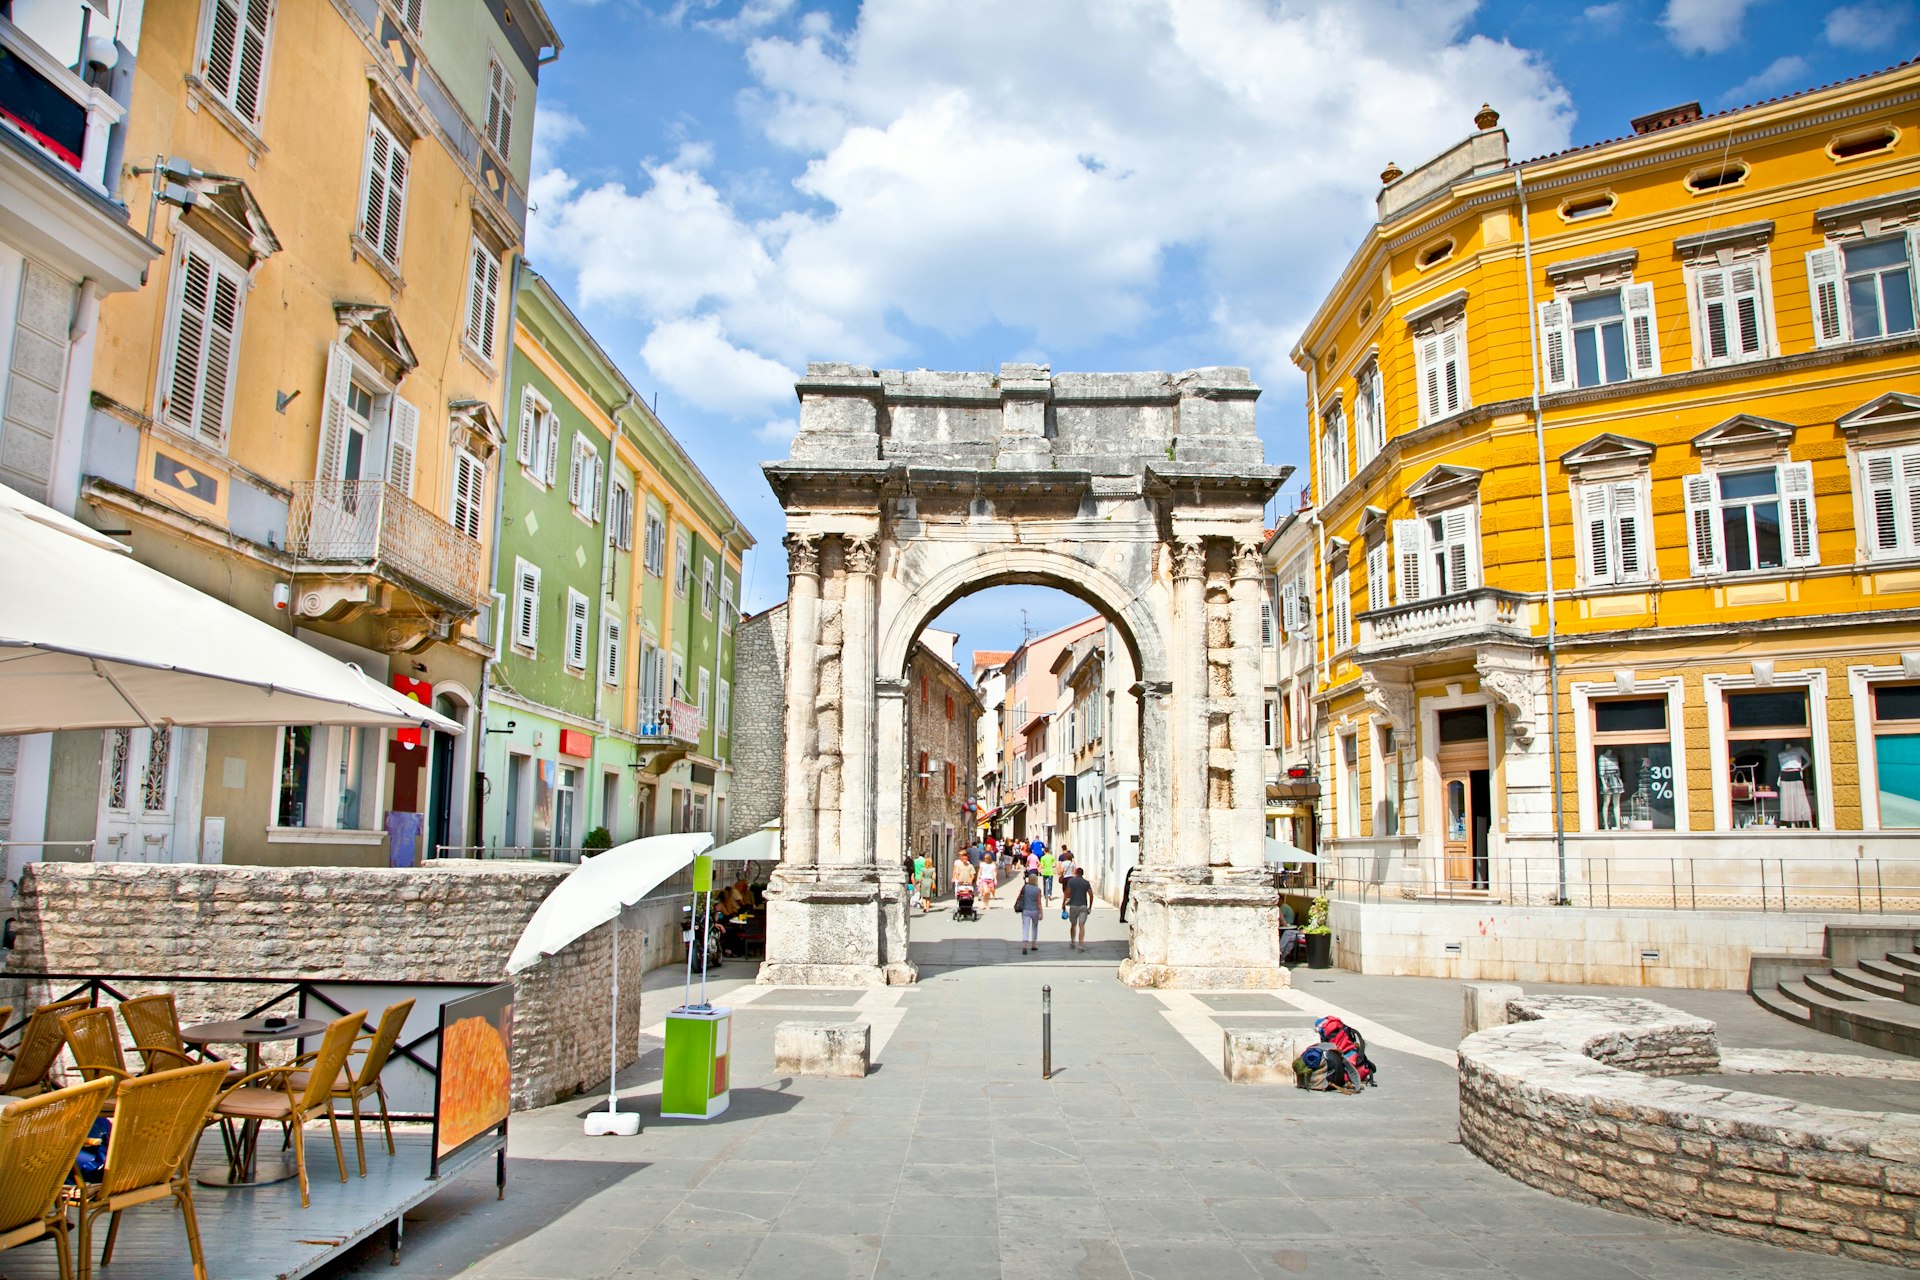 People walk near the Sergius Arch in Pula on a sunny day